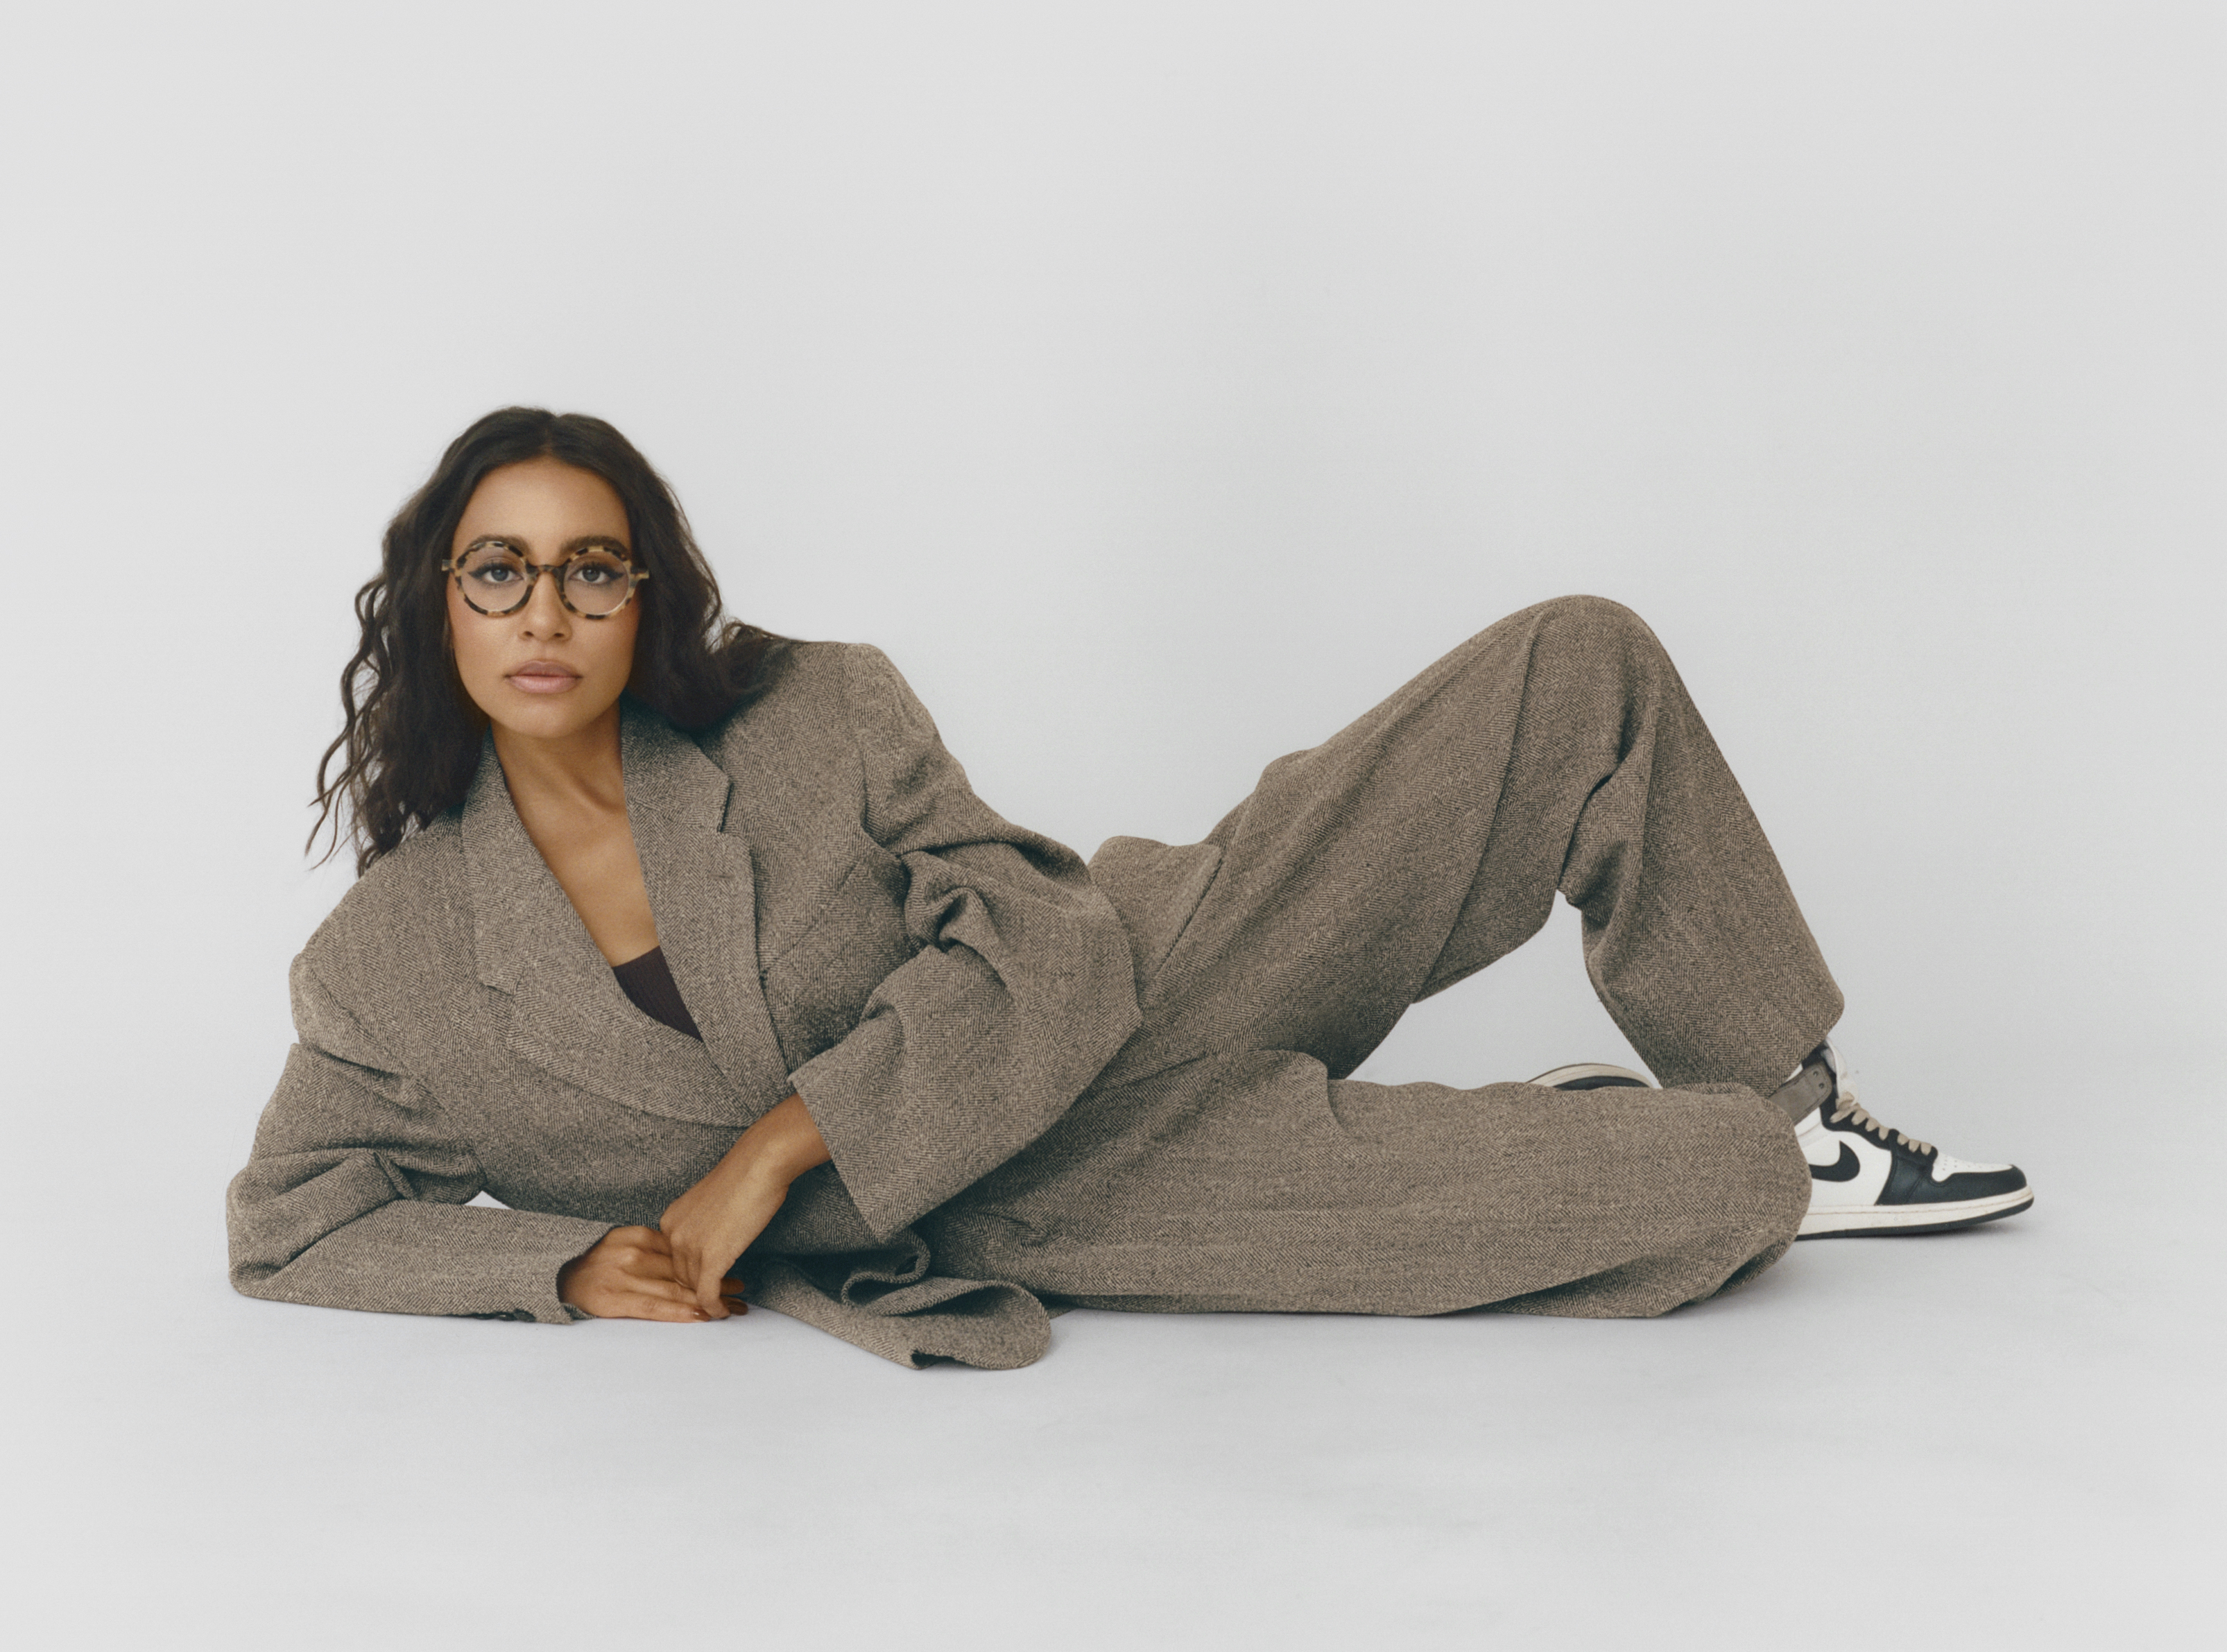 Portrait of Hannah Traore wearing a tan two-piece suit set and sneakers, laying on a seamless white backdrop.